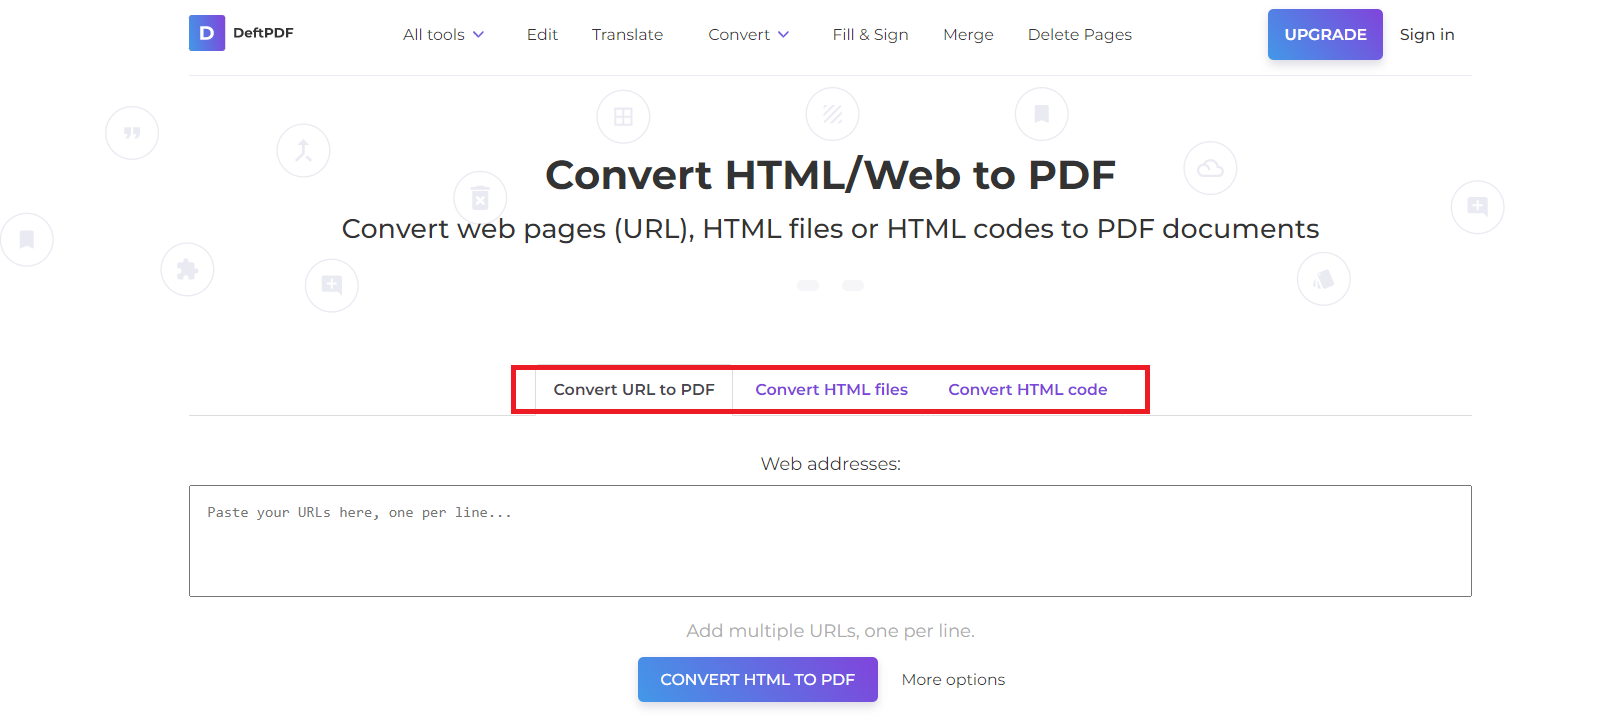 DeftPDF convert from URL, file or code into PDF